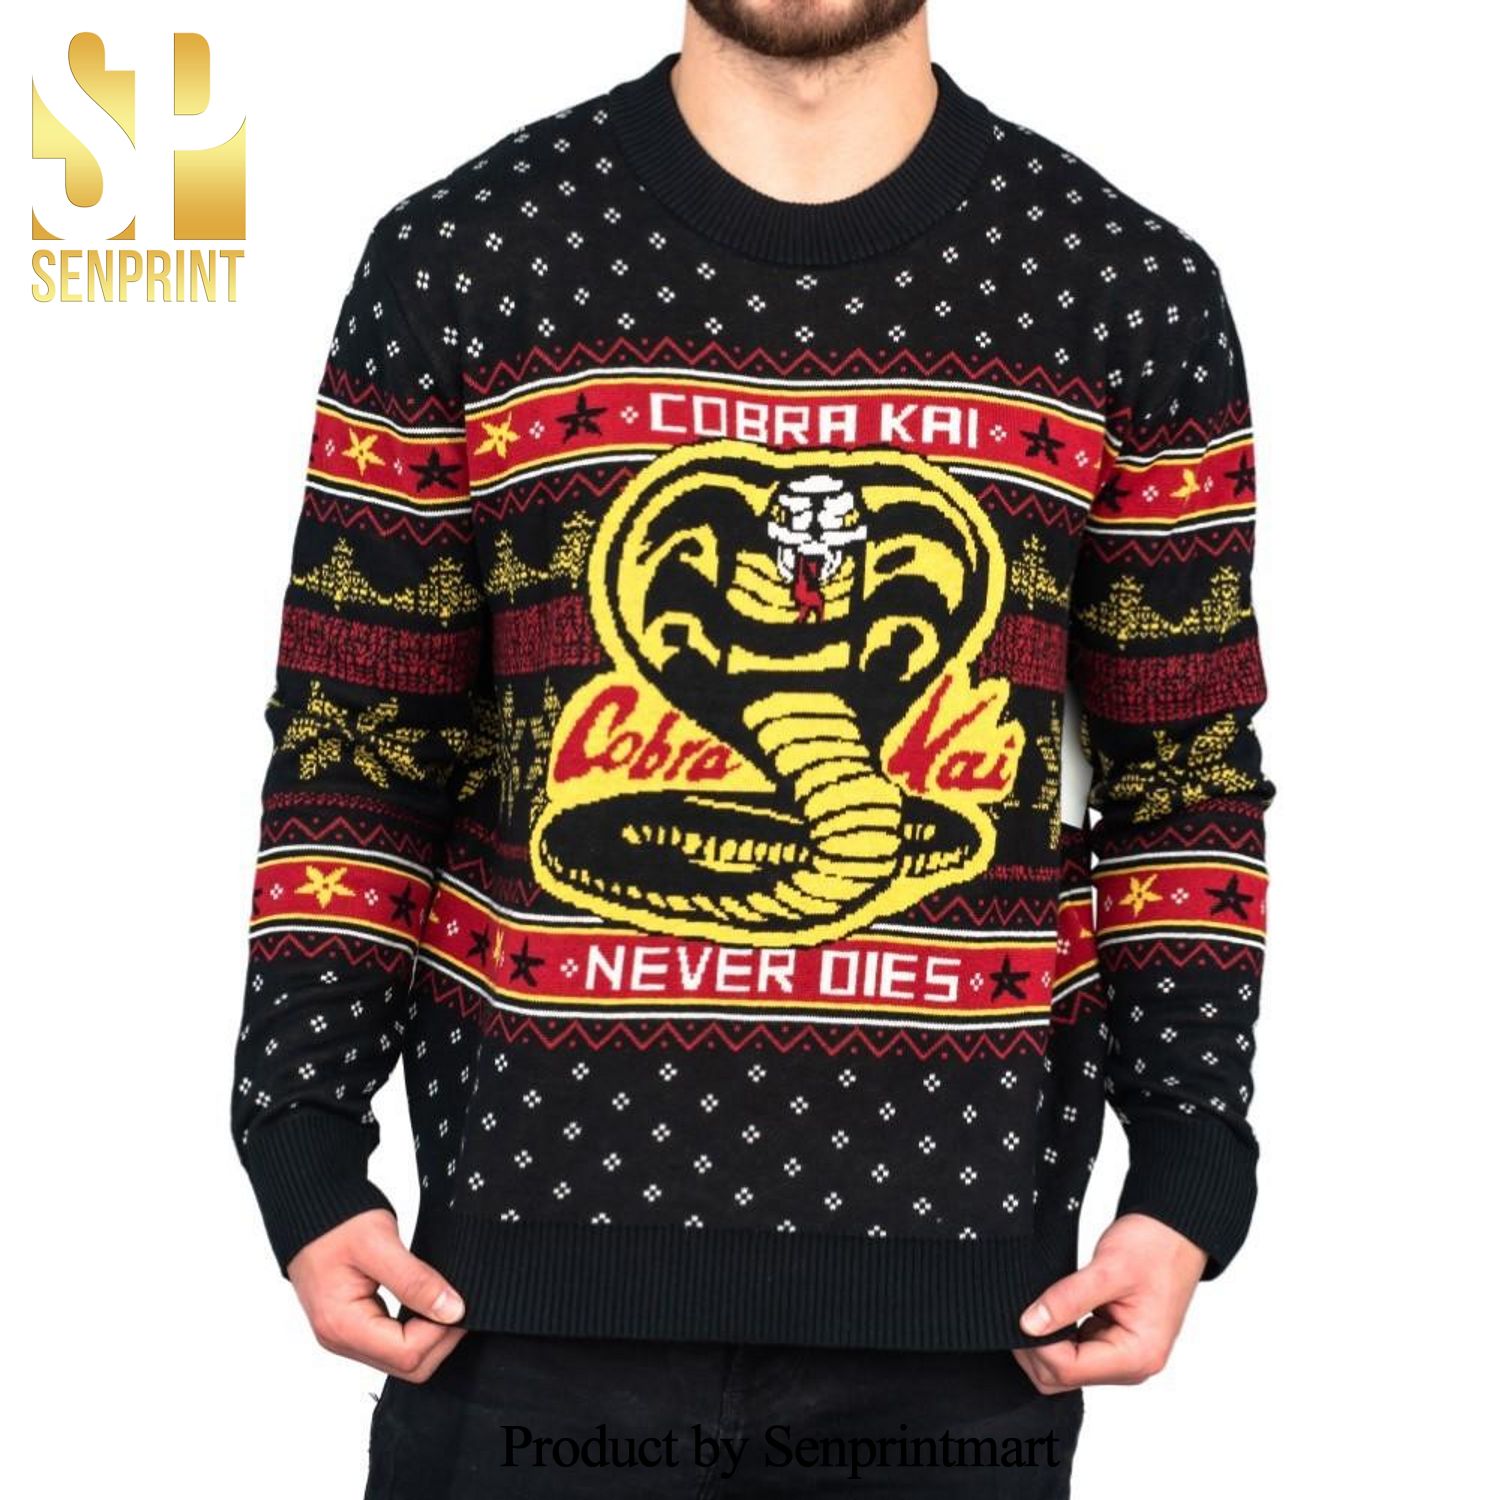 Cobra Kai Never Dies Knitted Ugly Christmas Sweater